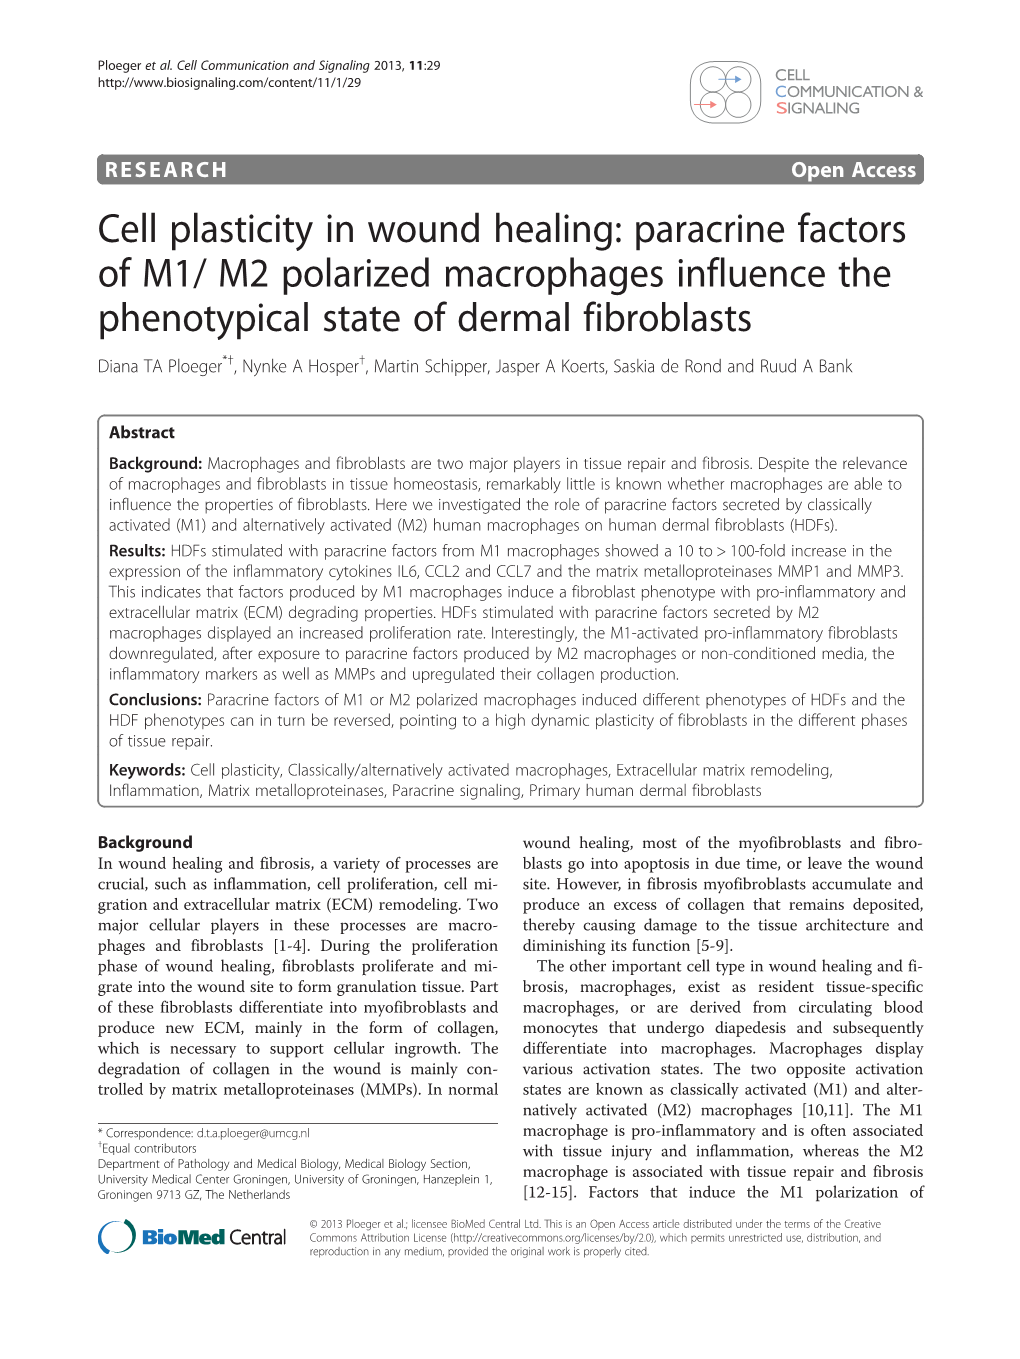 Cell Plasticity in Wound Healing: Paracrine Factors of M1